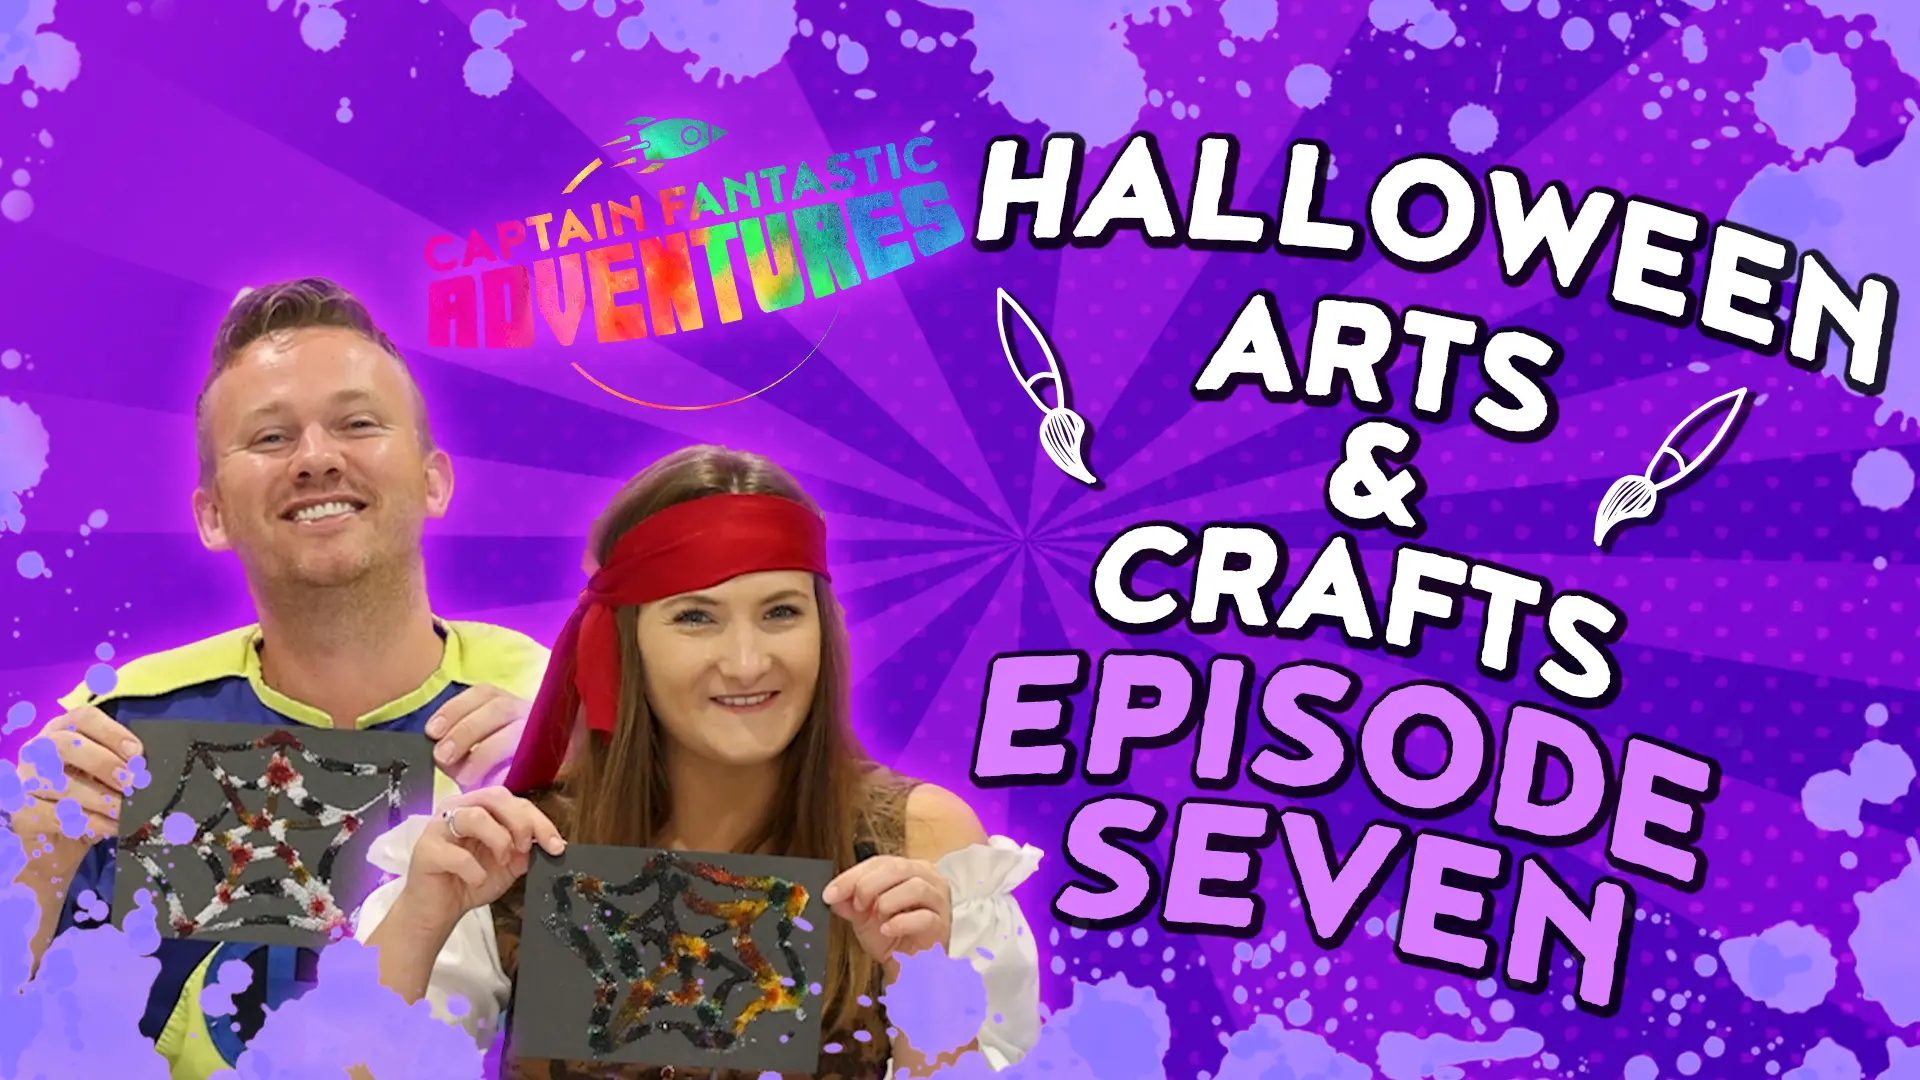 Crafting Spooky Fun: Halloween Arts and Crafts with Captain Fantastic